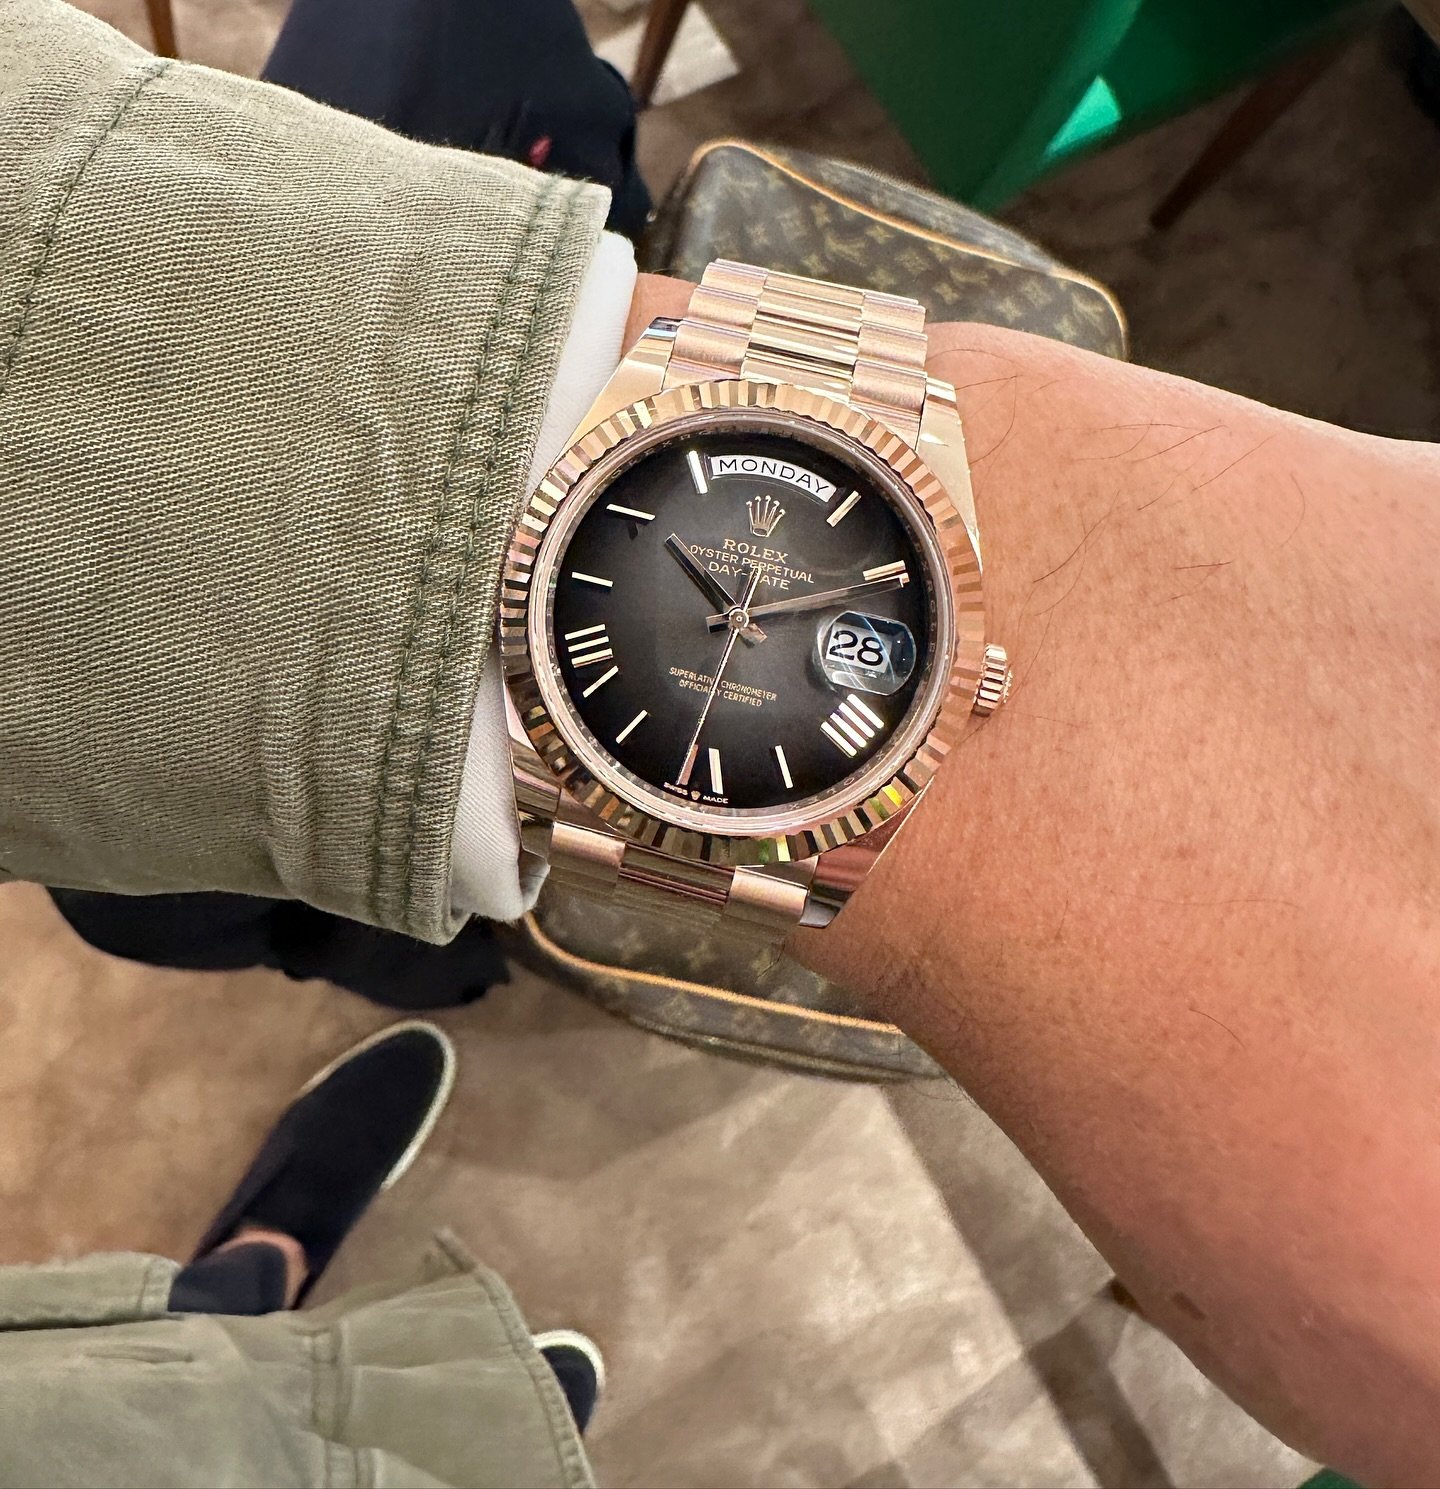 Gimme gimme gimme &lsquo;todo el&rsquo; power. Rolex Day-Date 40 Everose Slate Ombr&eacute; Dial ref. 228235 #rolex #daydate40 #daydateeveroseombre #everoseombredial #228235 #rolexpresident #watchlife #watchcollectinglifestyle